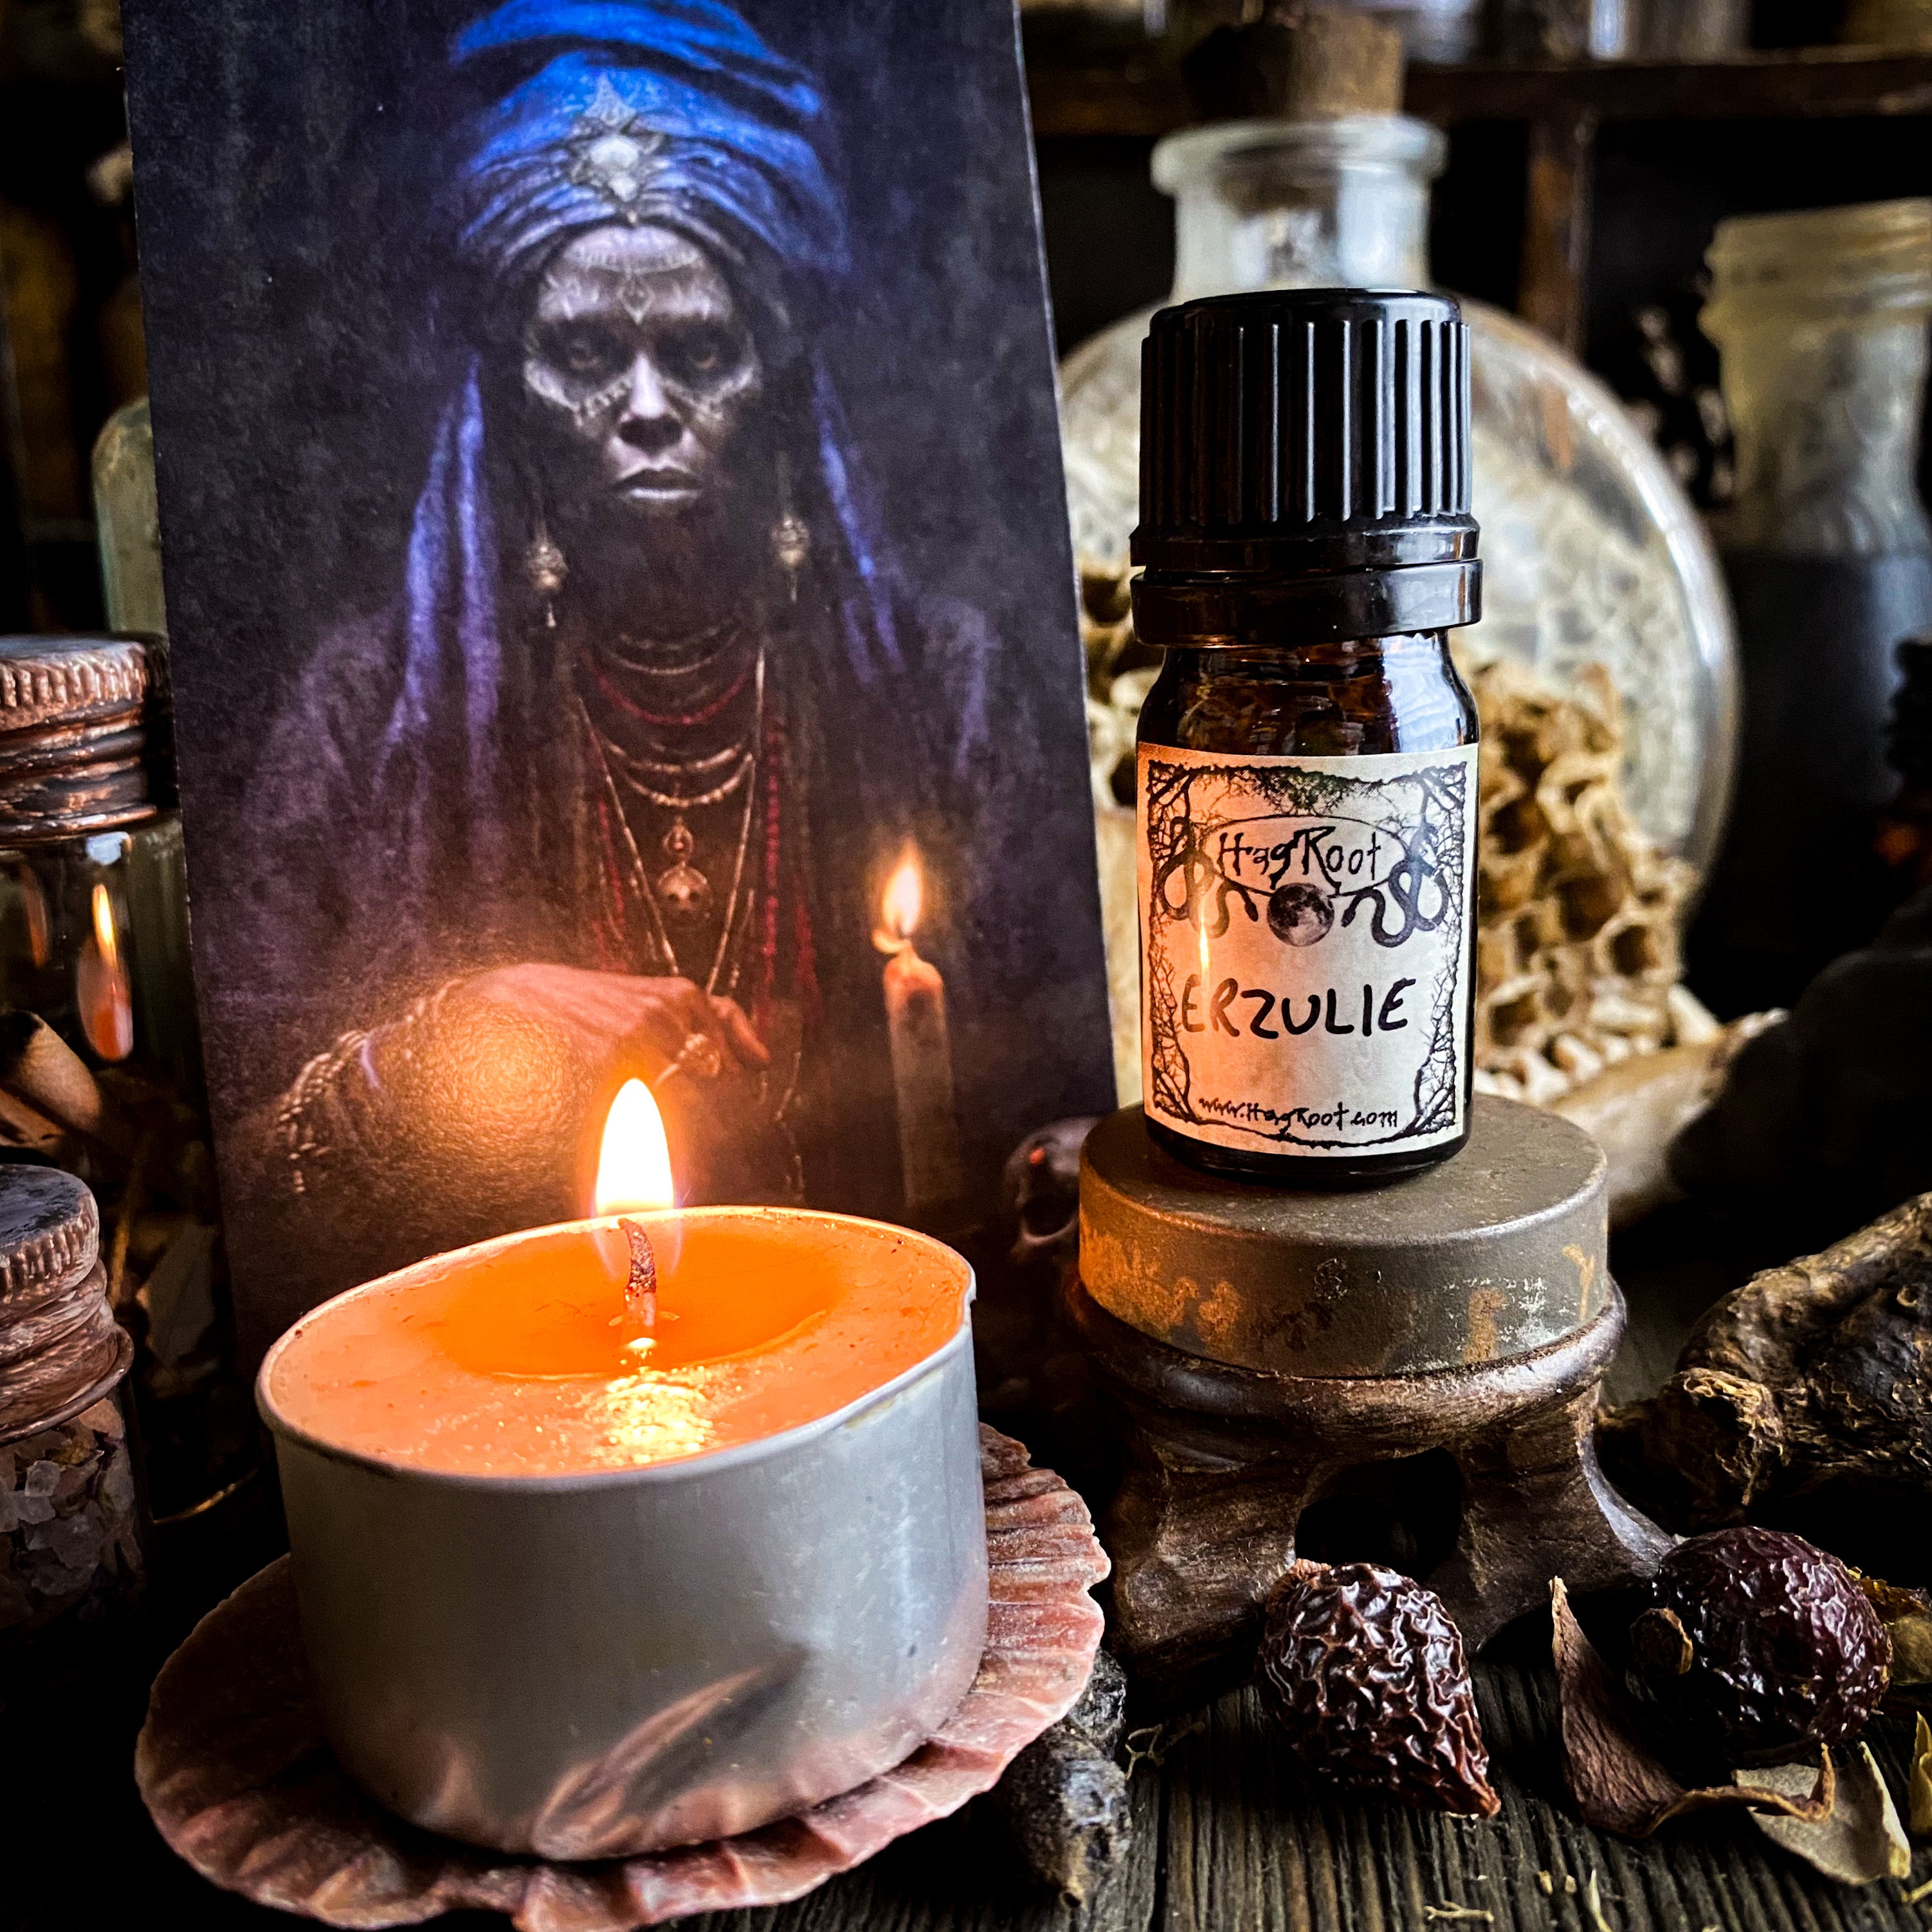 ERZULIE-(Patchouli, Hay, Sandalwood, Smoked Wood, Jasmine, Rose, Spicy Pepper)-Perfume, Cologne, Anointing, Ritual Oil